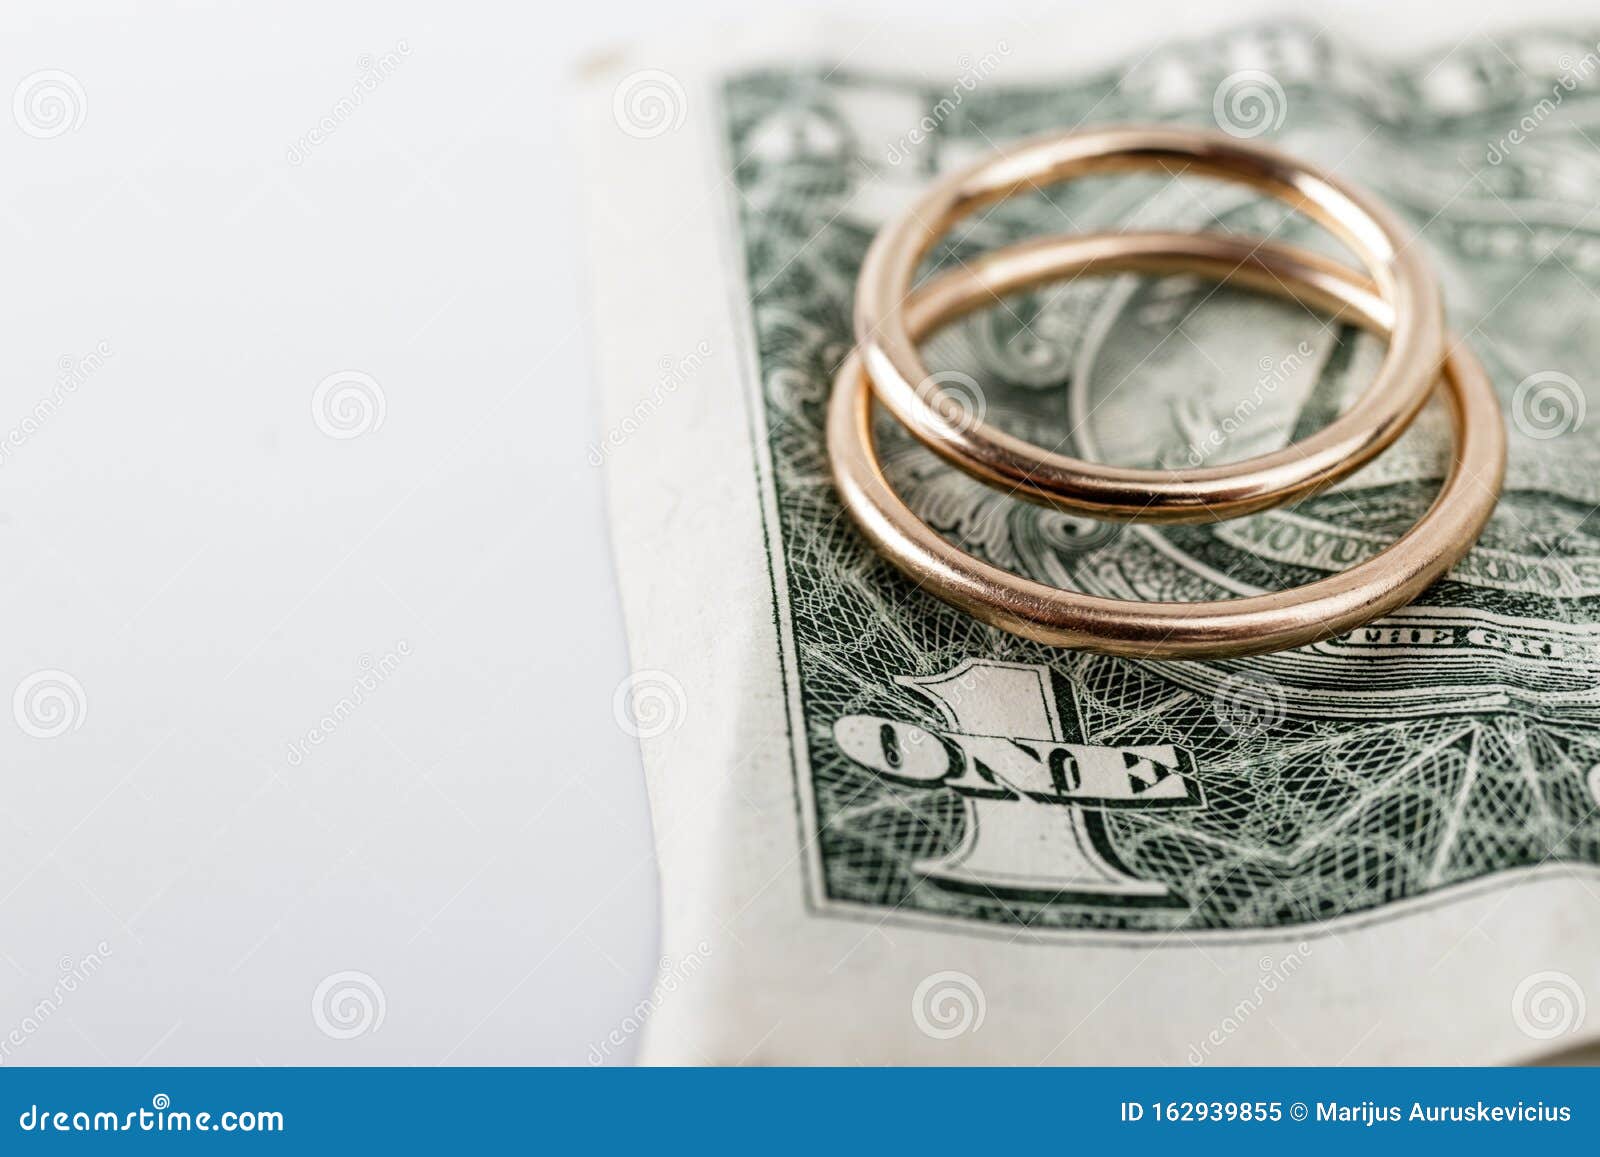 Two Wedding  Rings  And Currency Wedding  Or Divorce  Concept 